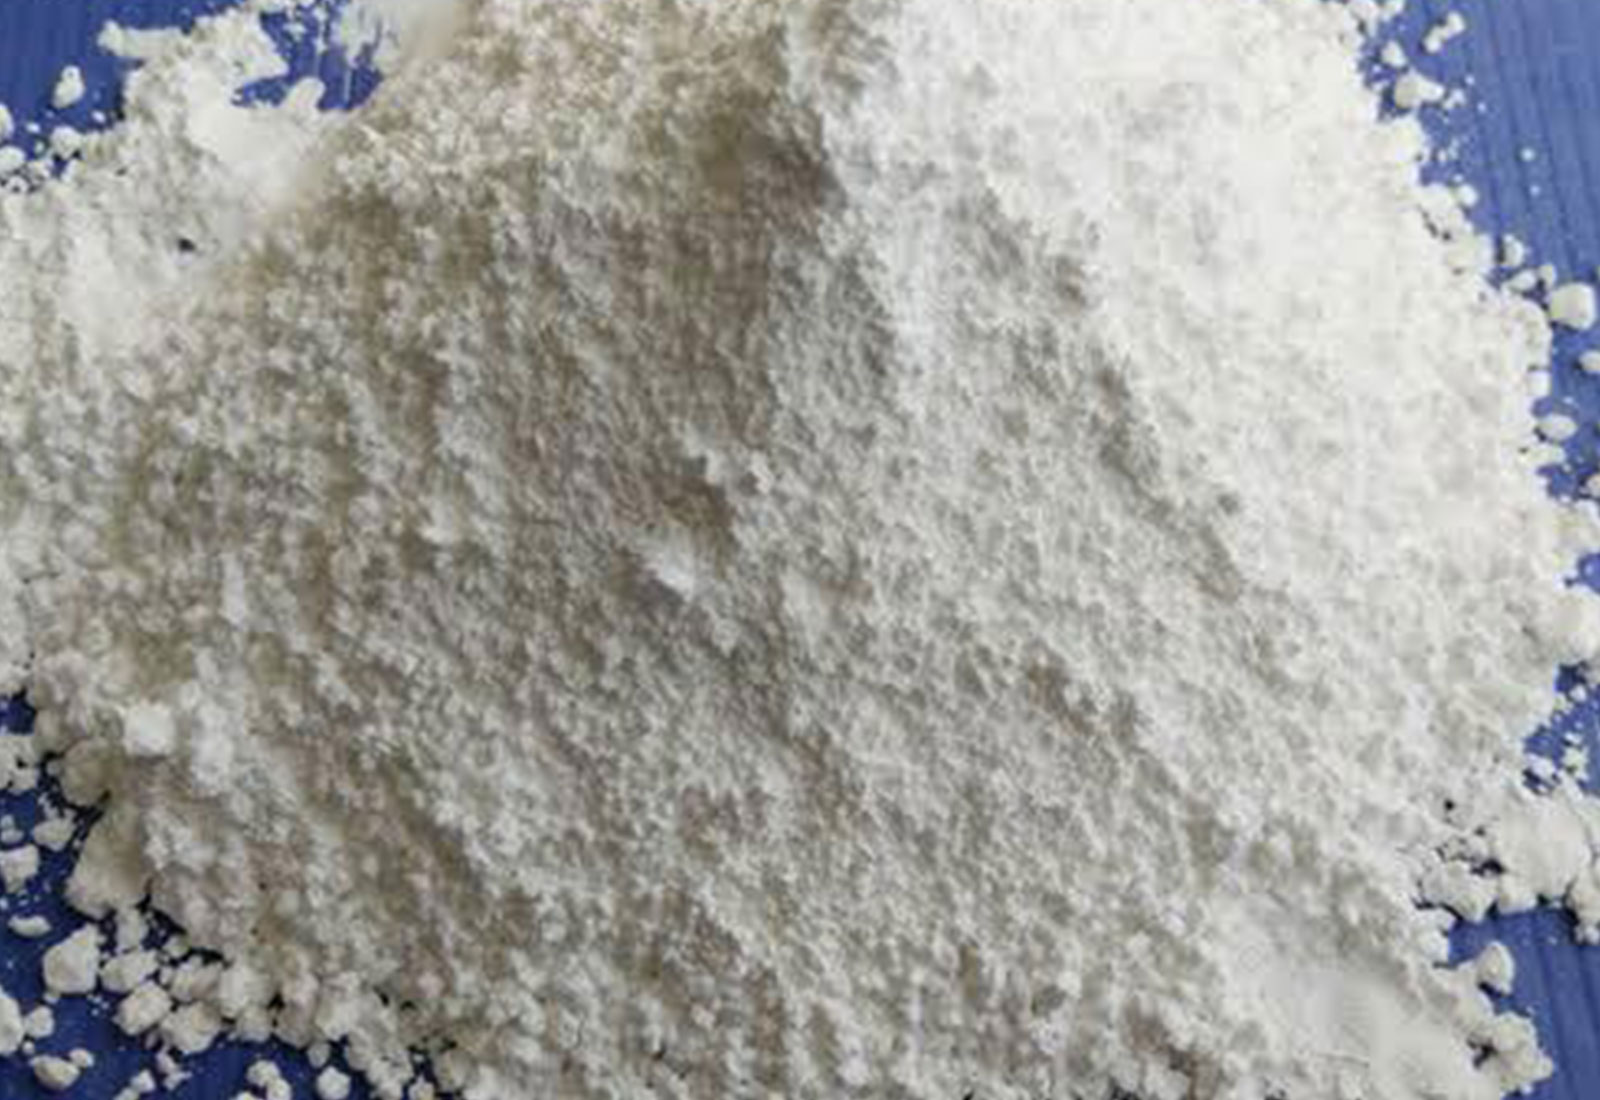 how to make calcium carbonate tablets